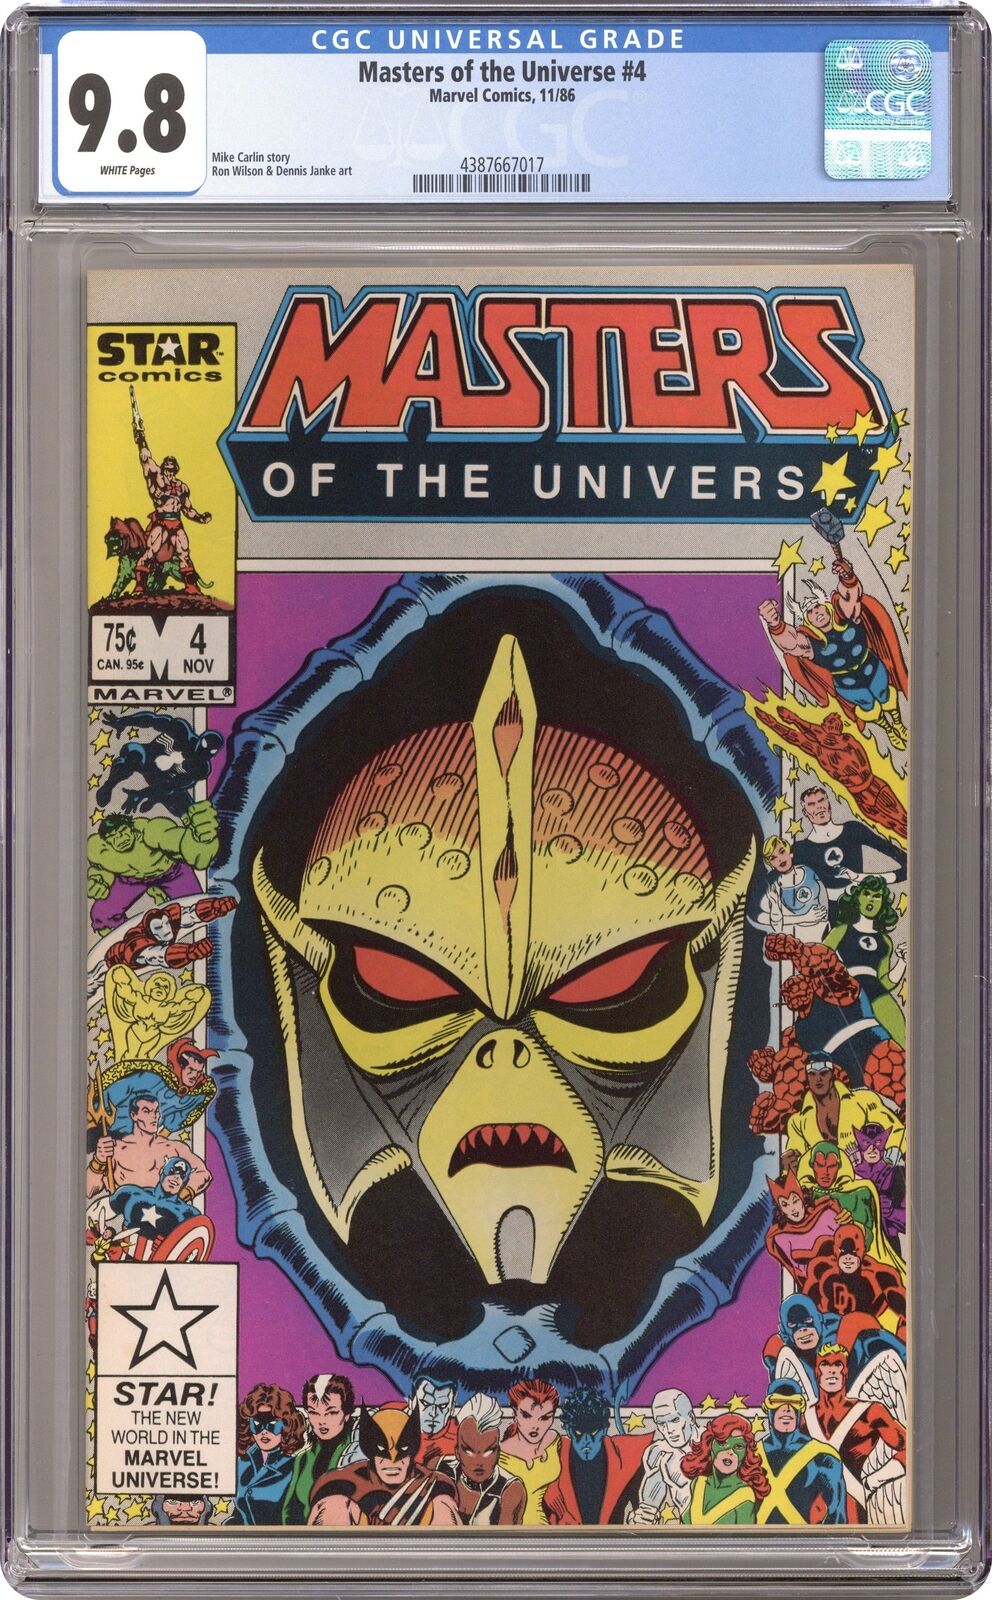 Masters of the Universe #4 CGC 9.8 1986 4387667017